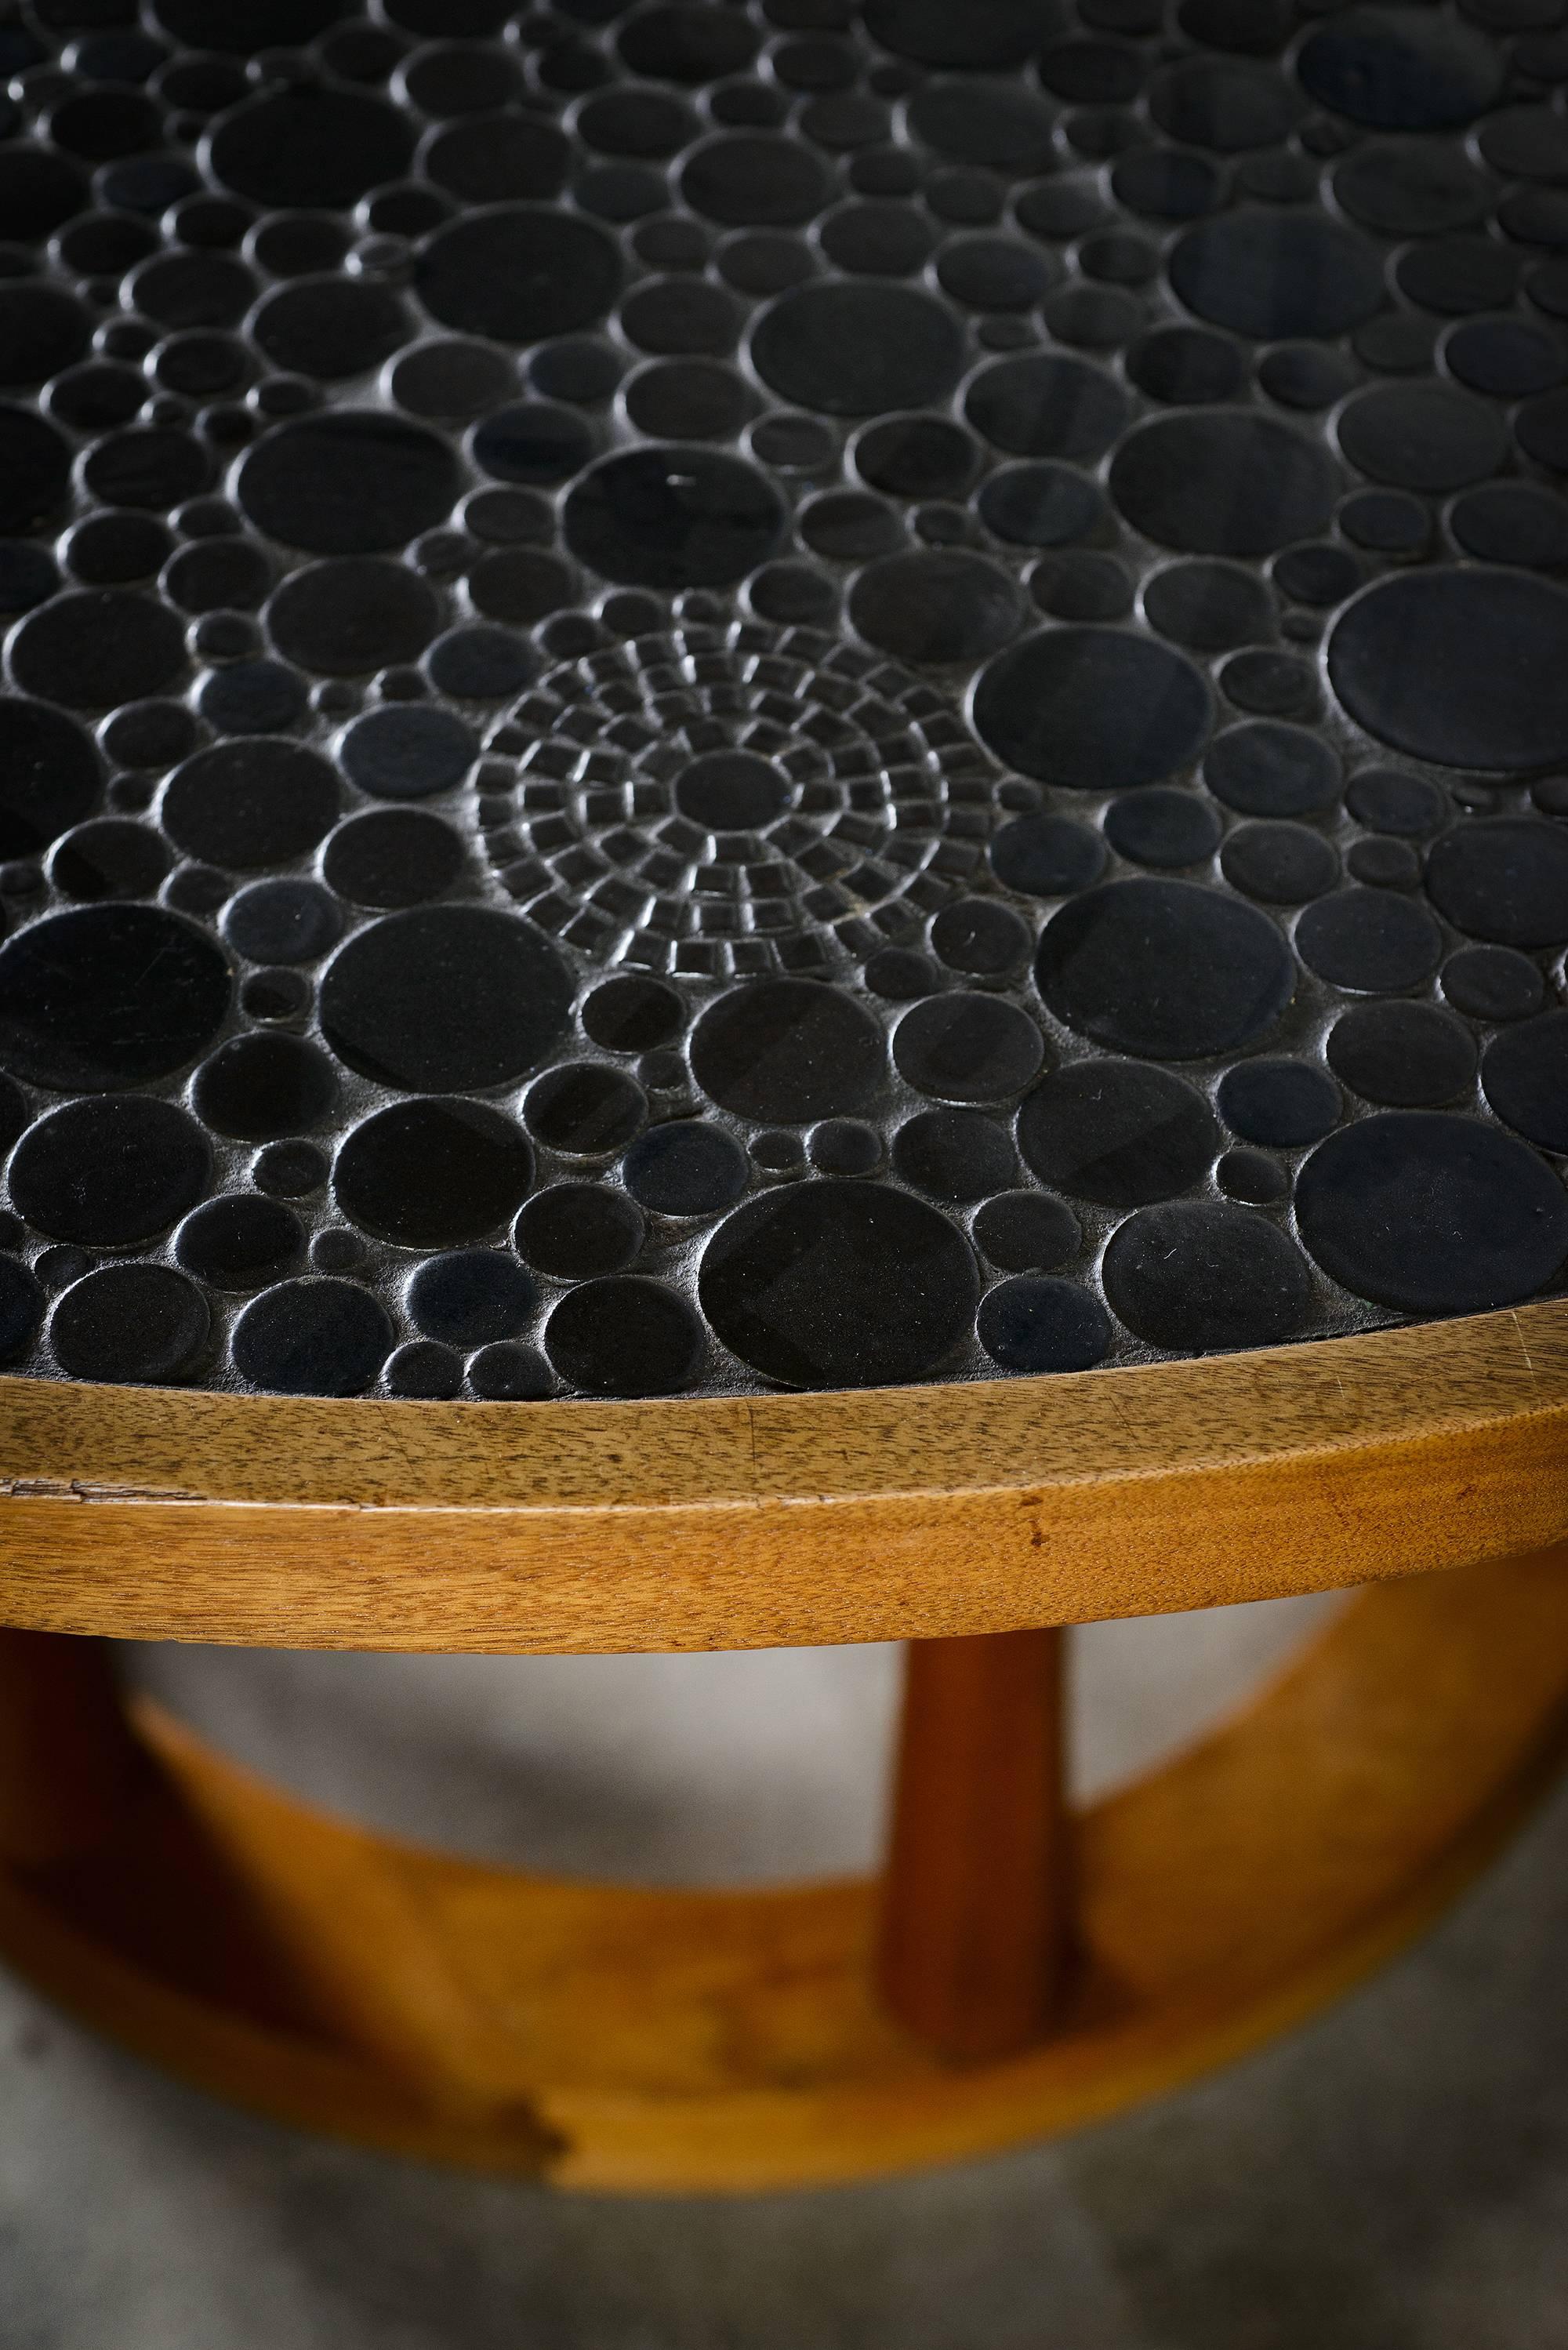 Ceramic Marshall Studios Dining Table with Round Black Glazed Tiles and Walnut, 1960s